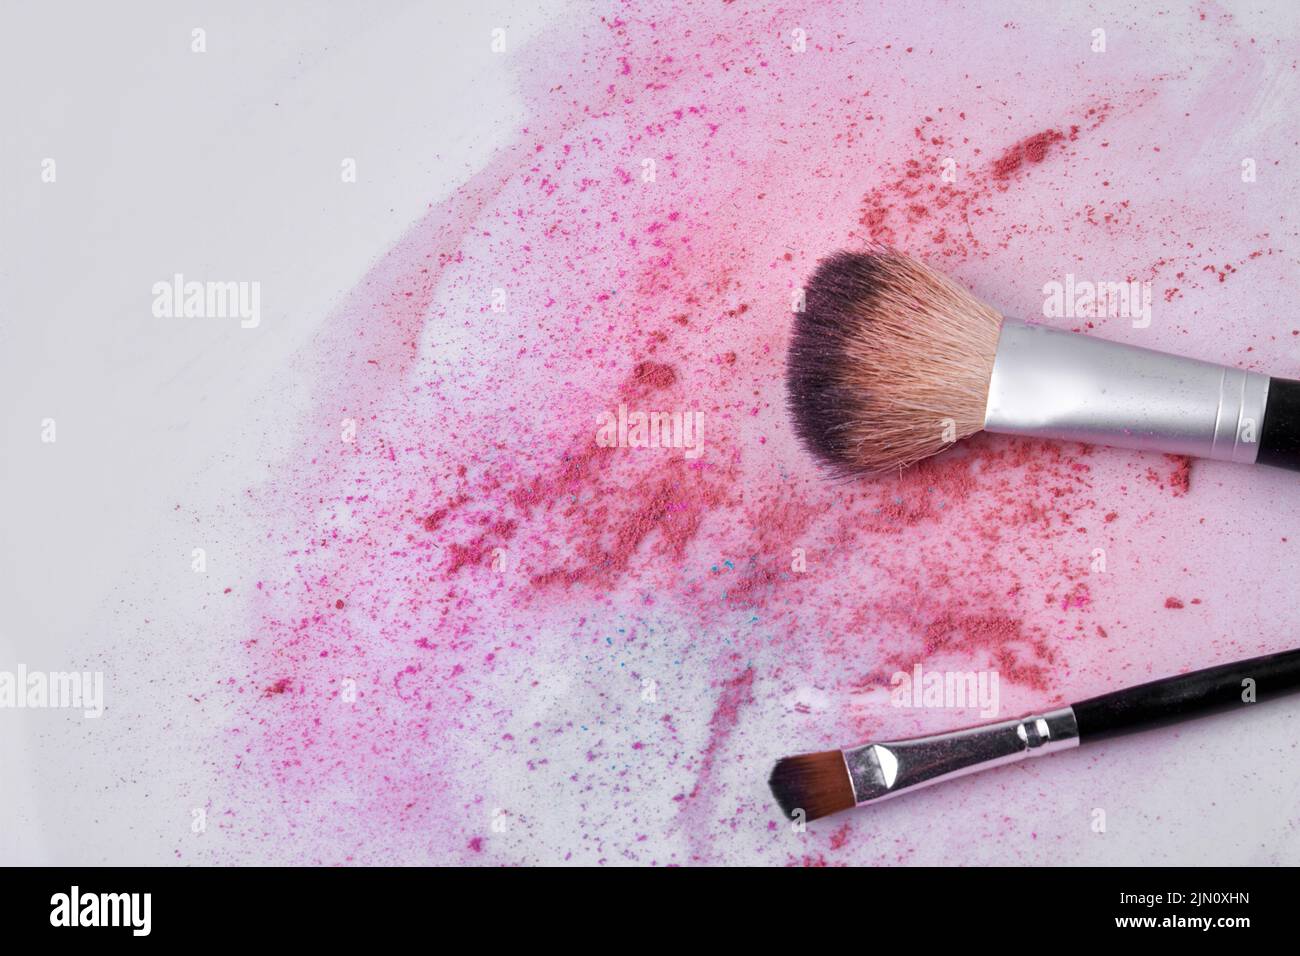 Makeup brush and scattered face powder on white background. Space for text. Stock Photo